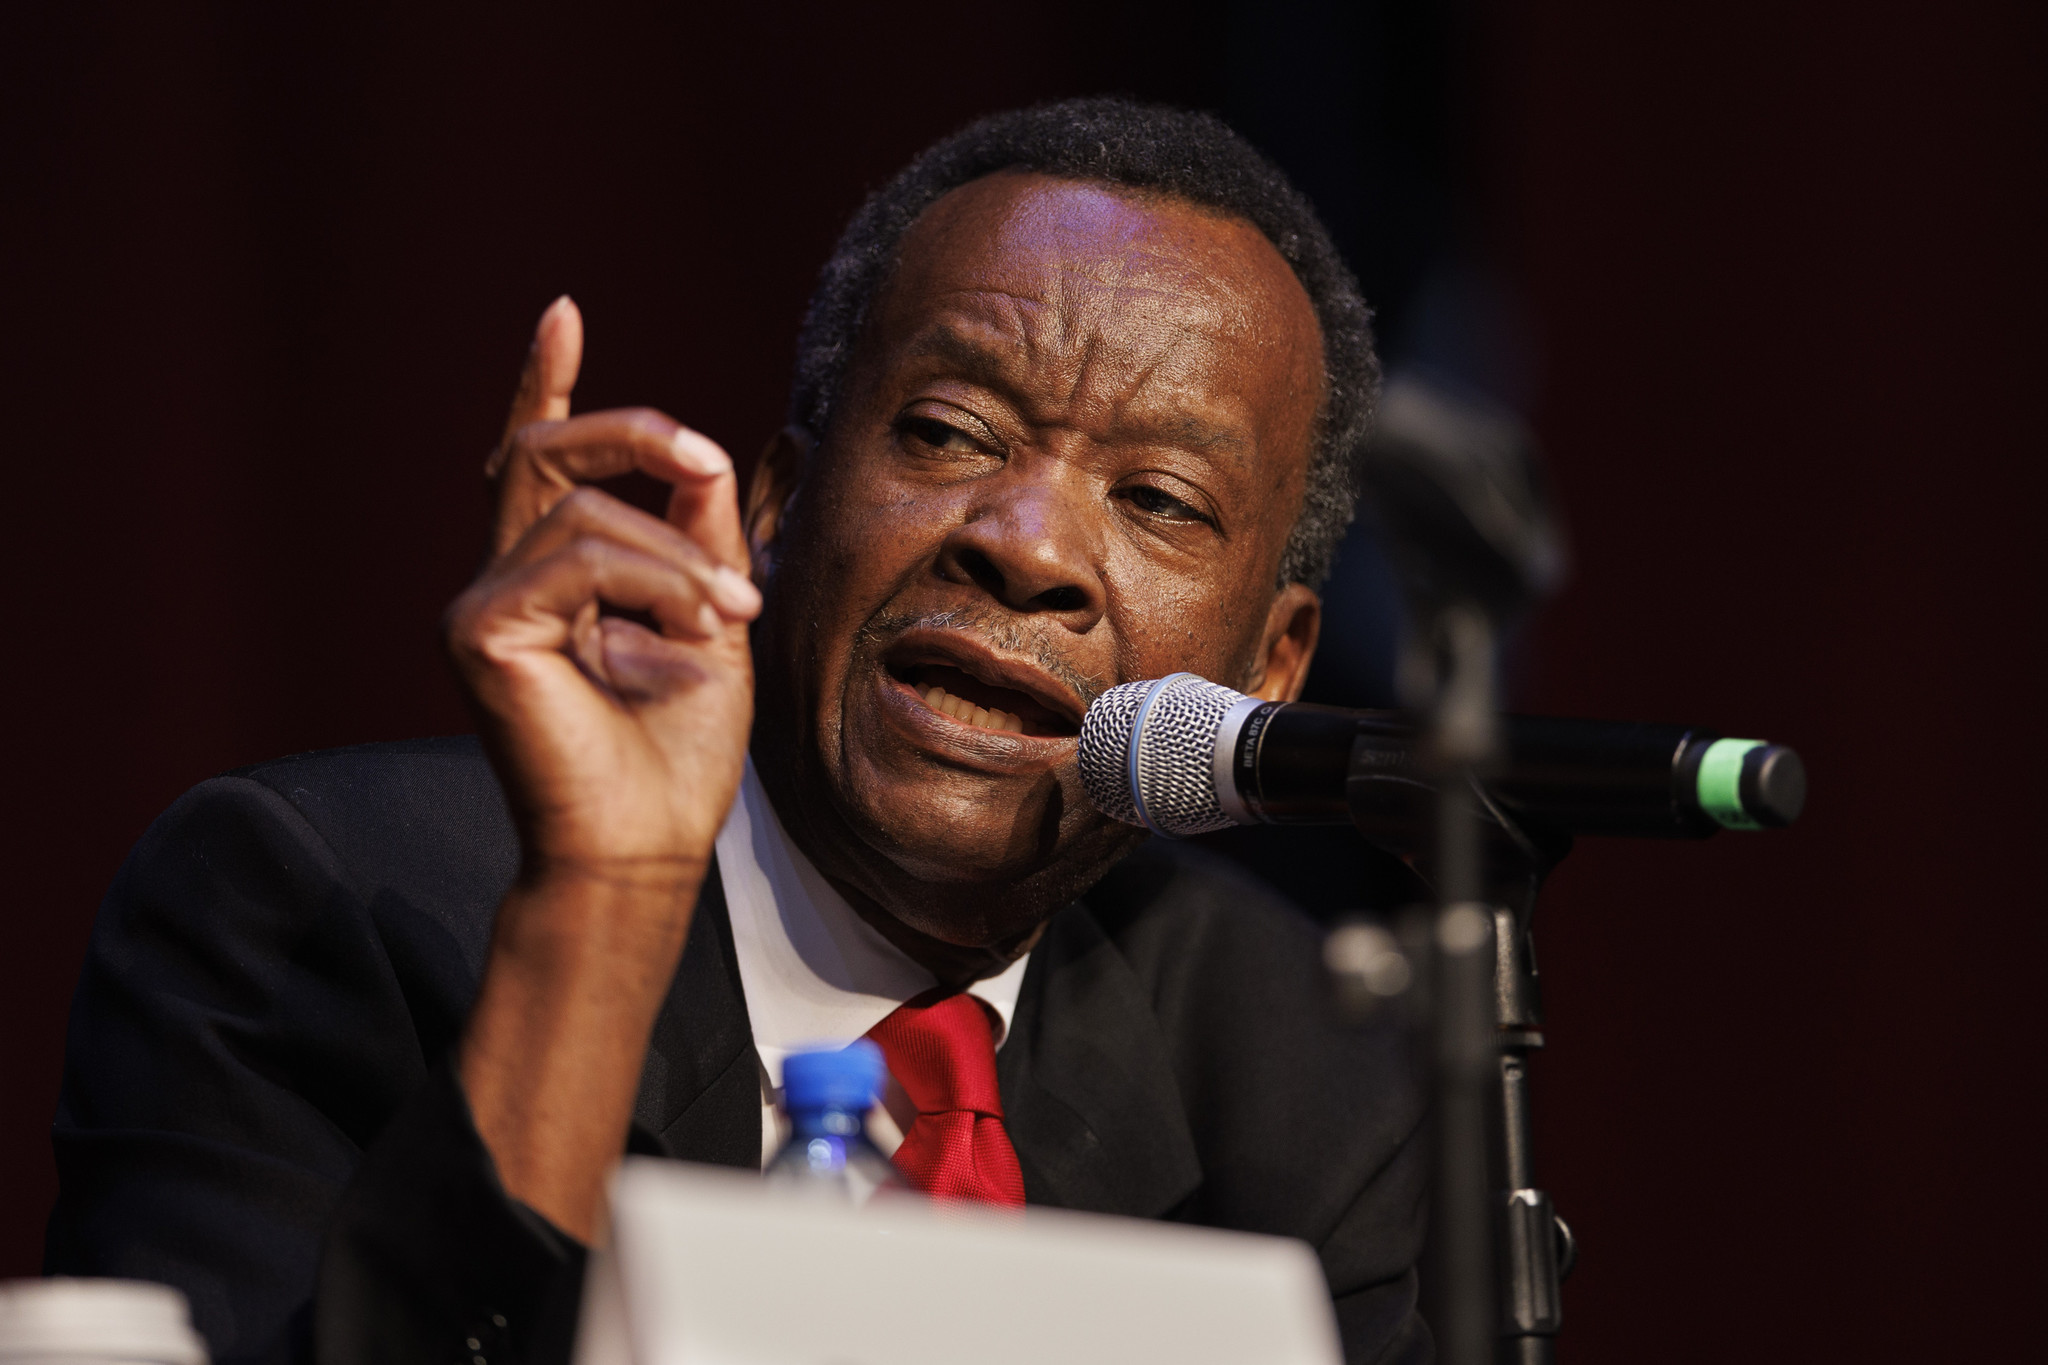 Willie Wilson selling up-by-the-bootstraps story in Chicago mayor race